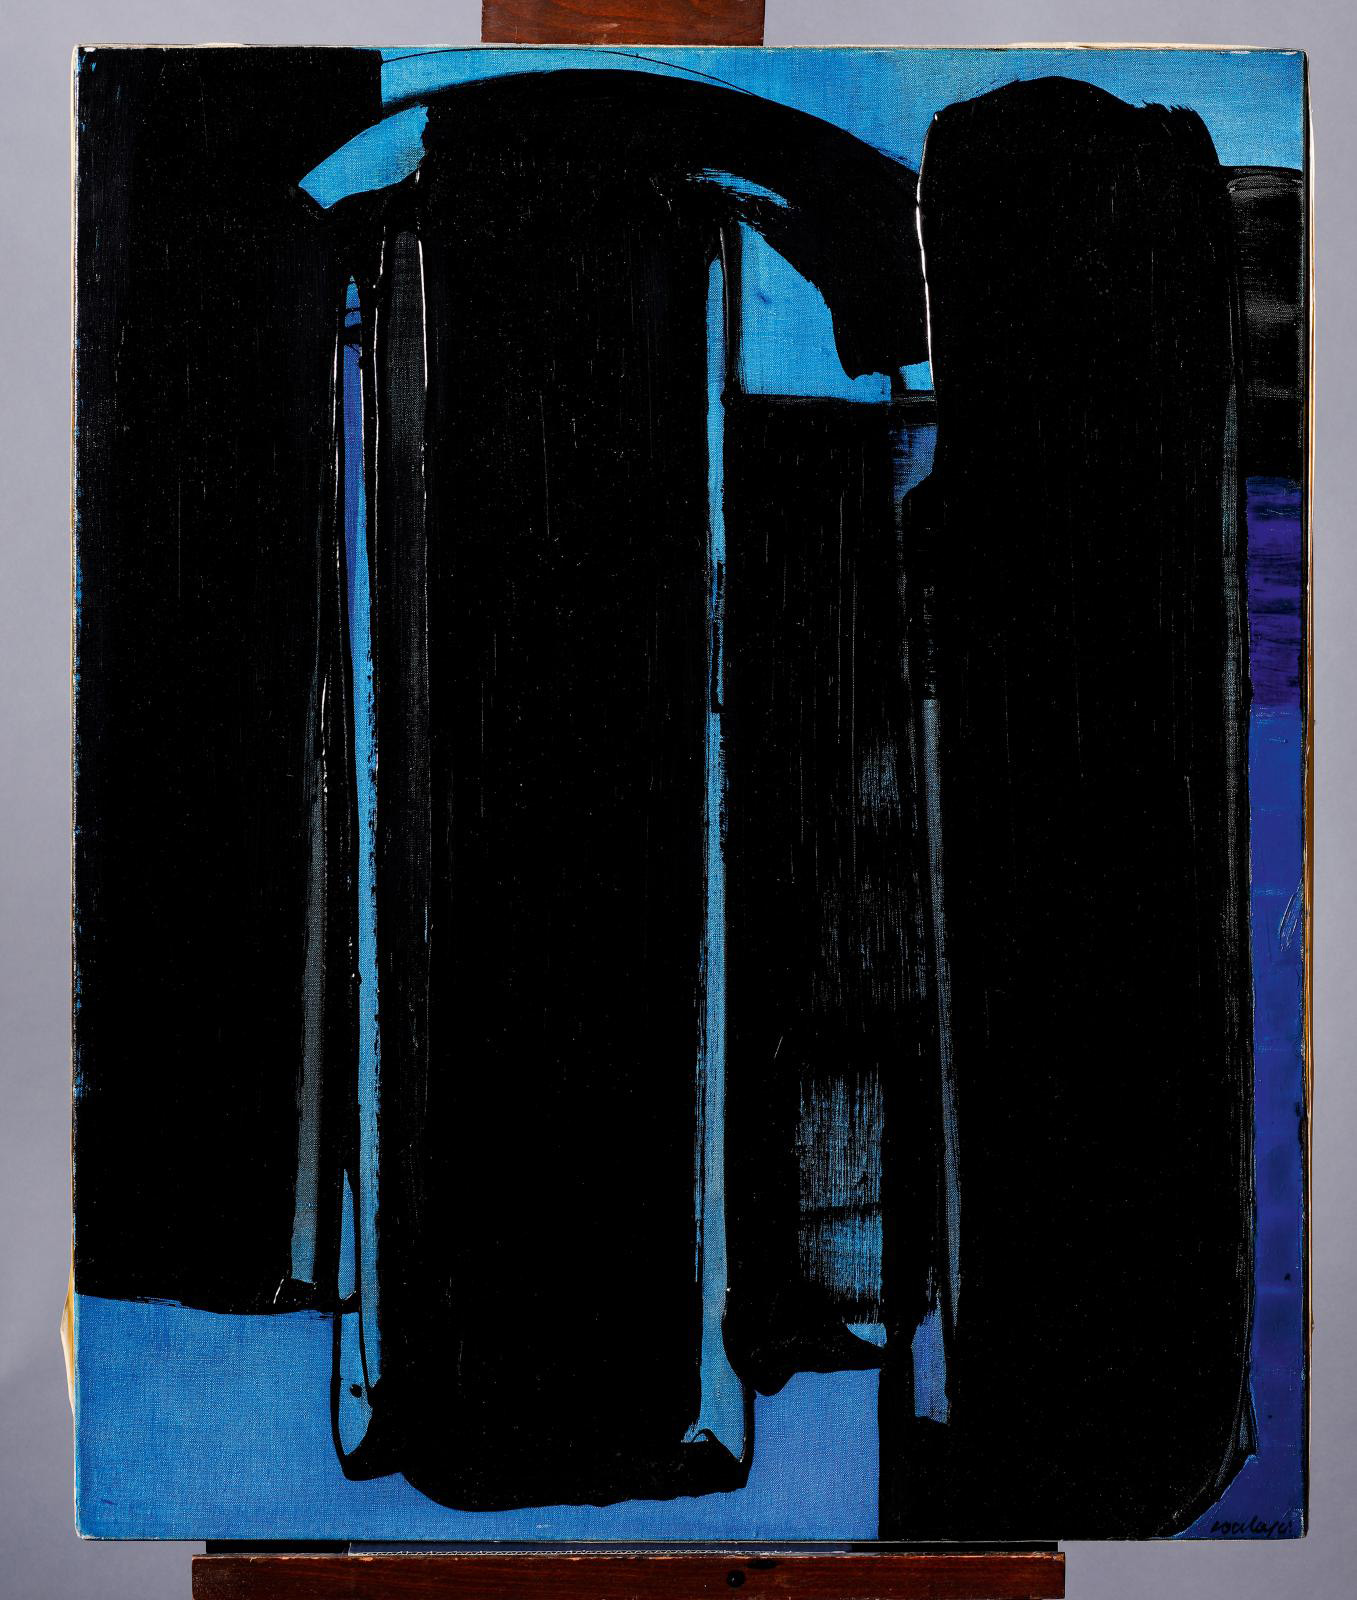 An Unprecedented 1975 Painting by Pierre Soulages